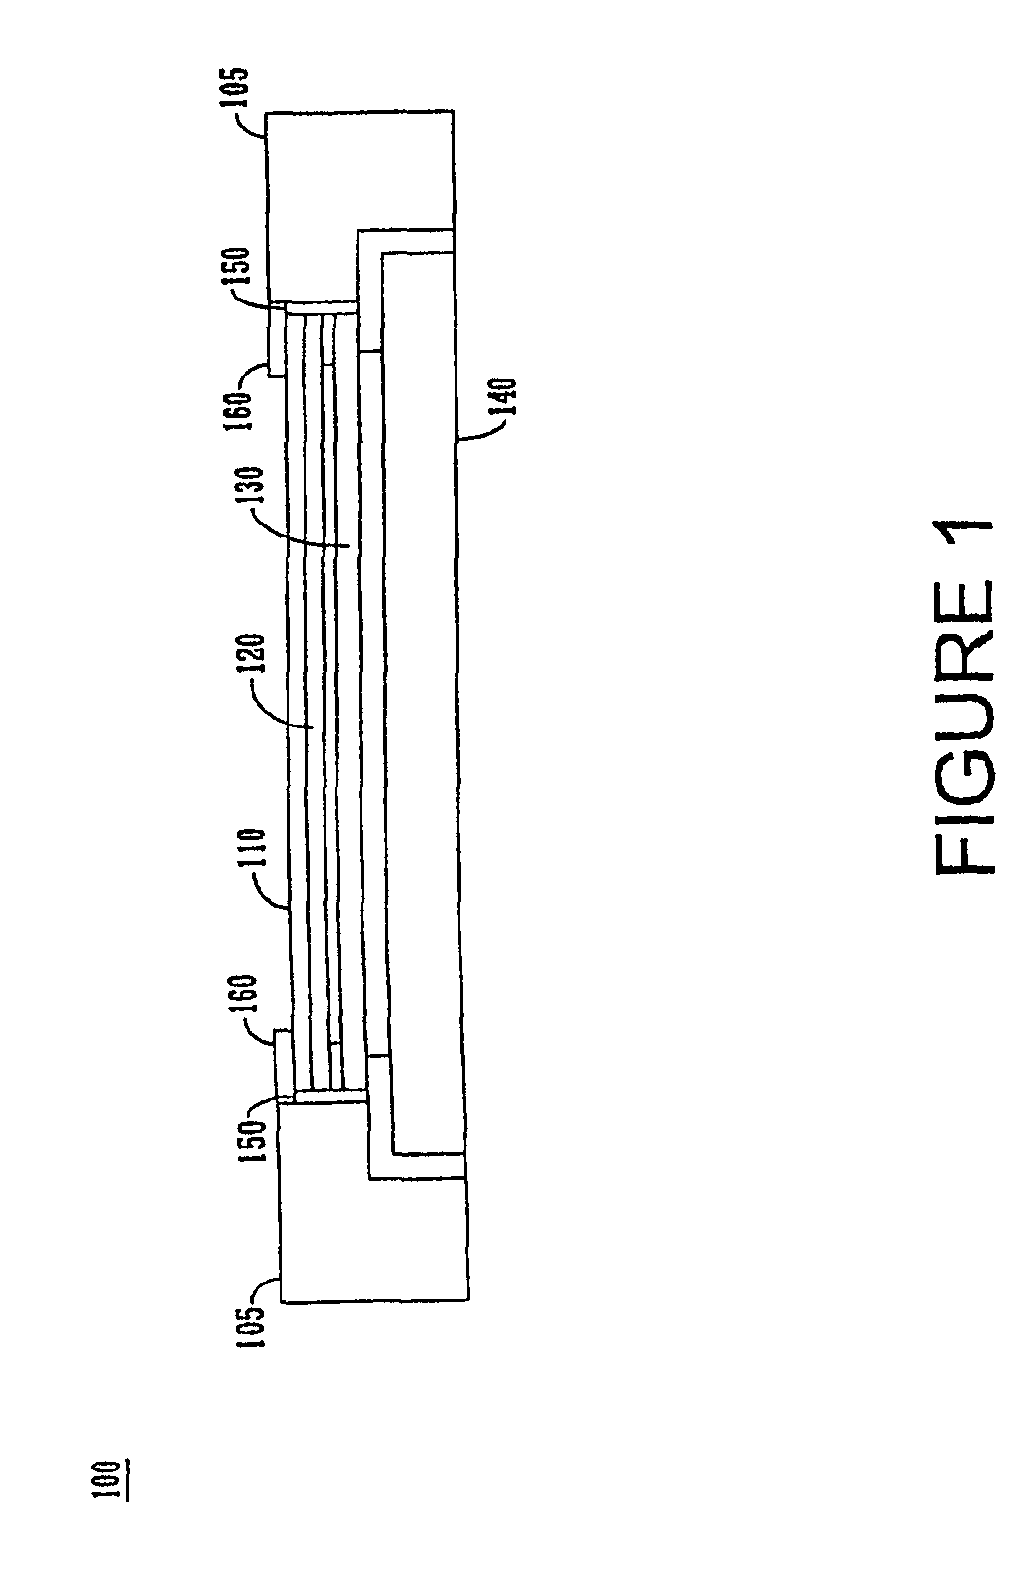 High transparency integrated enclosure touch screen assembly for a portable hand held device